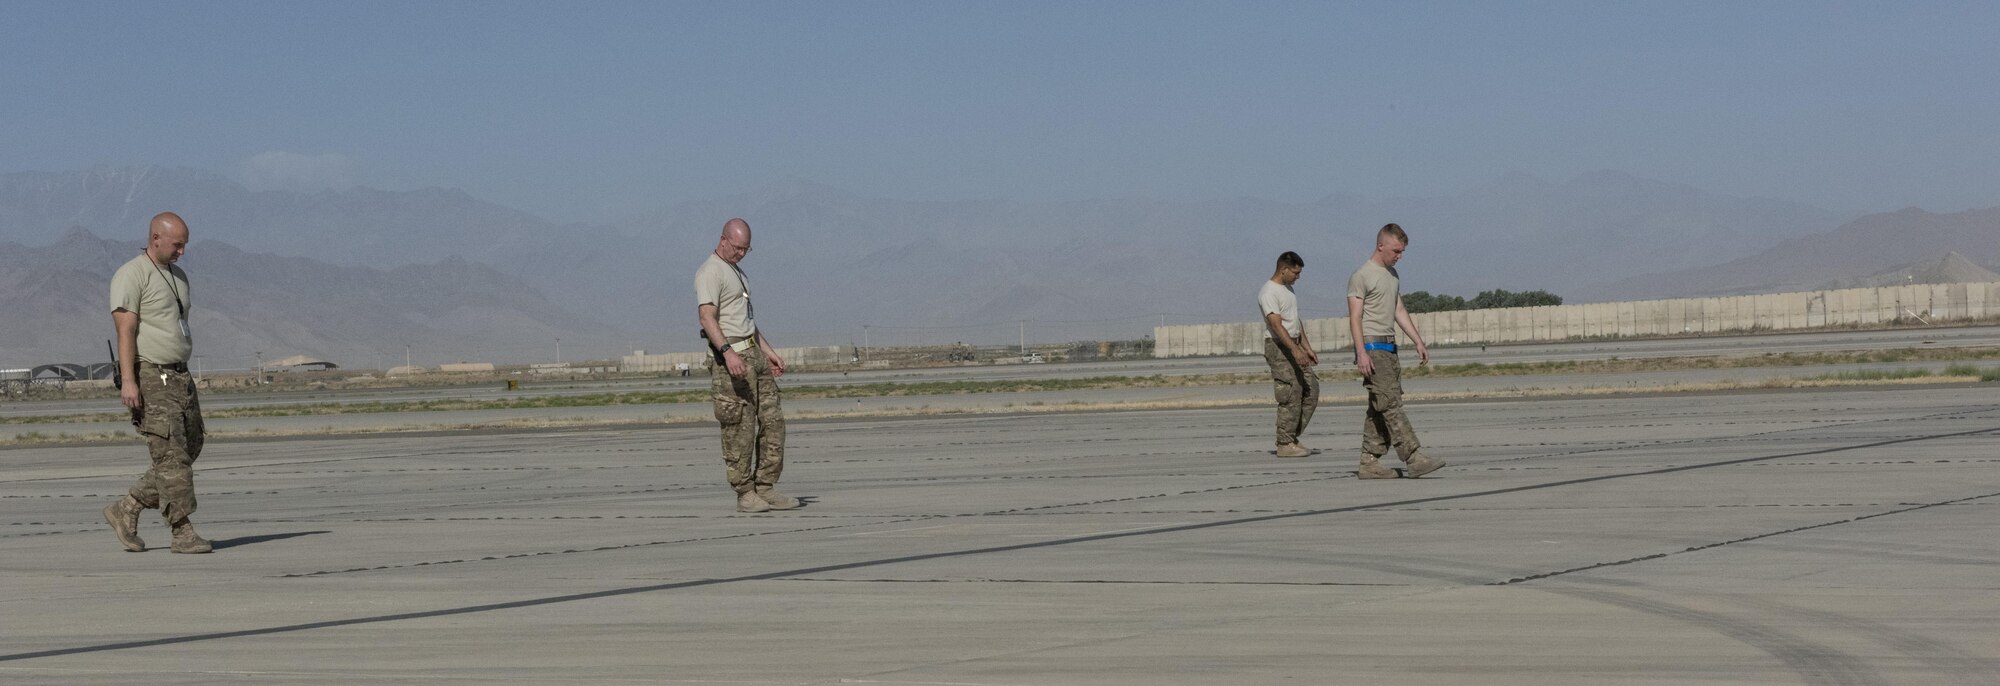 Maintenance Airmen perform a foreign object debris check on the airfield, July 1, 2016, Bagram Airfield, Afghanistan. Airfield management depends on individuals to help keep the airfield FOD free so that aircraft can take off and land safely. (U.S. Air Force photo by Tech. Sgt. Tyrona Lawson)